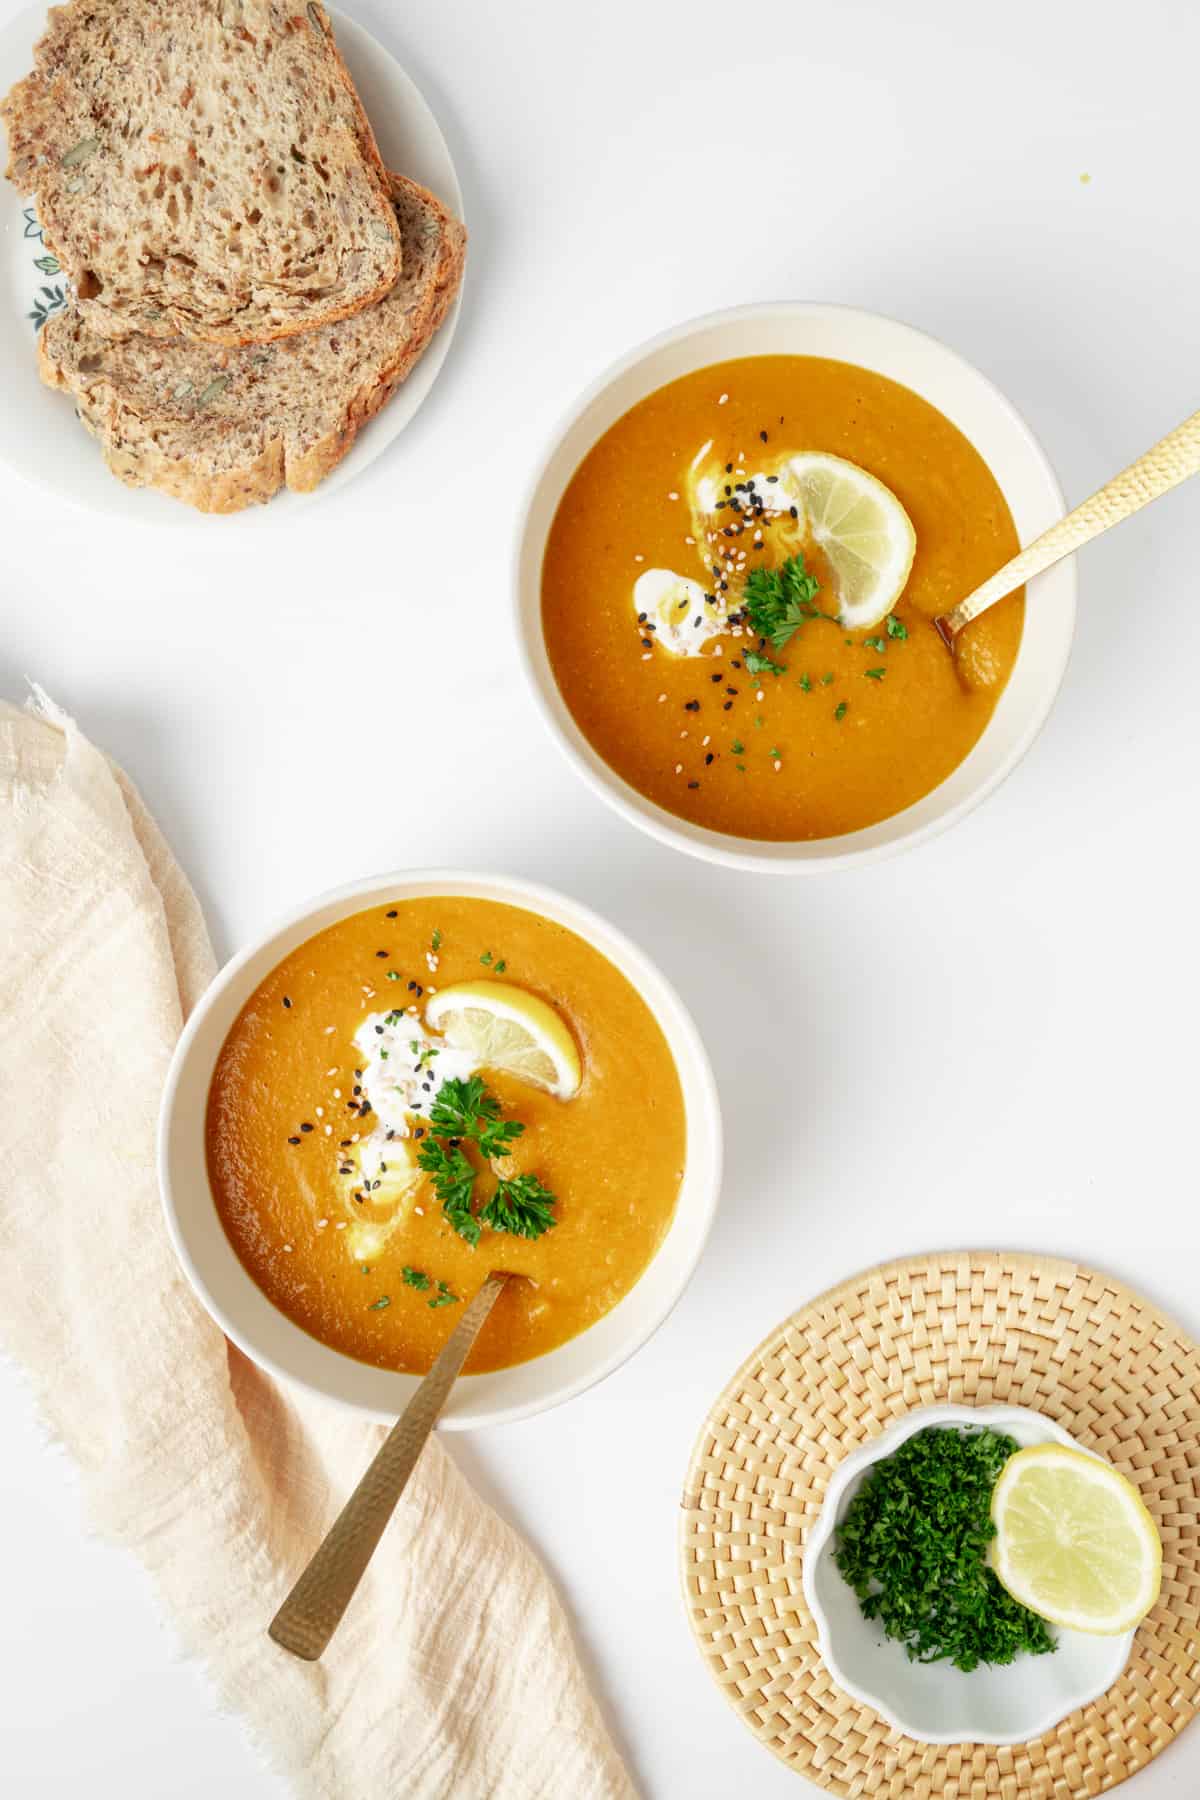 Two bowls of blended carrot and lentil soup served with bread.